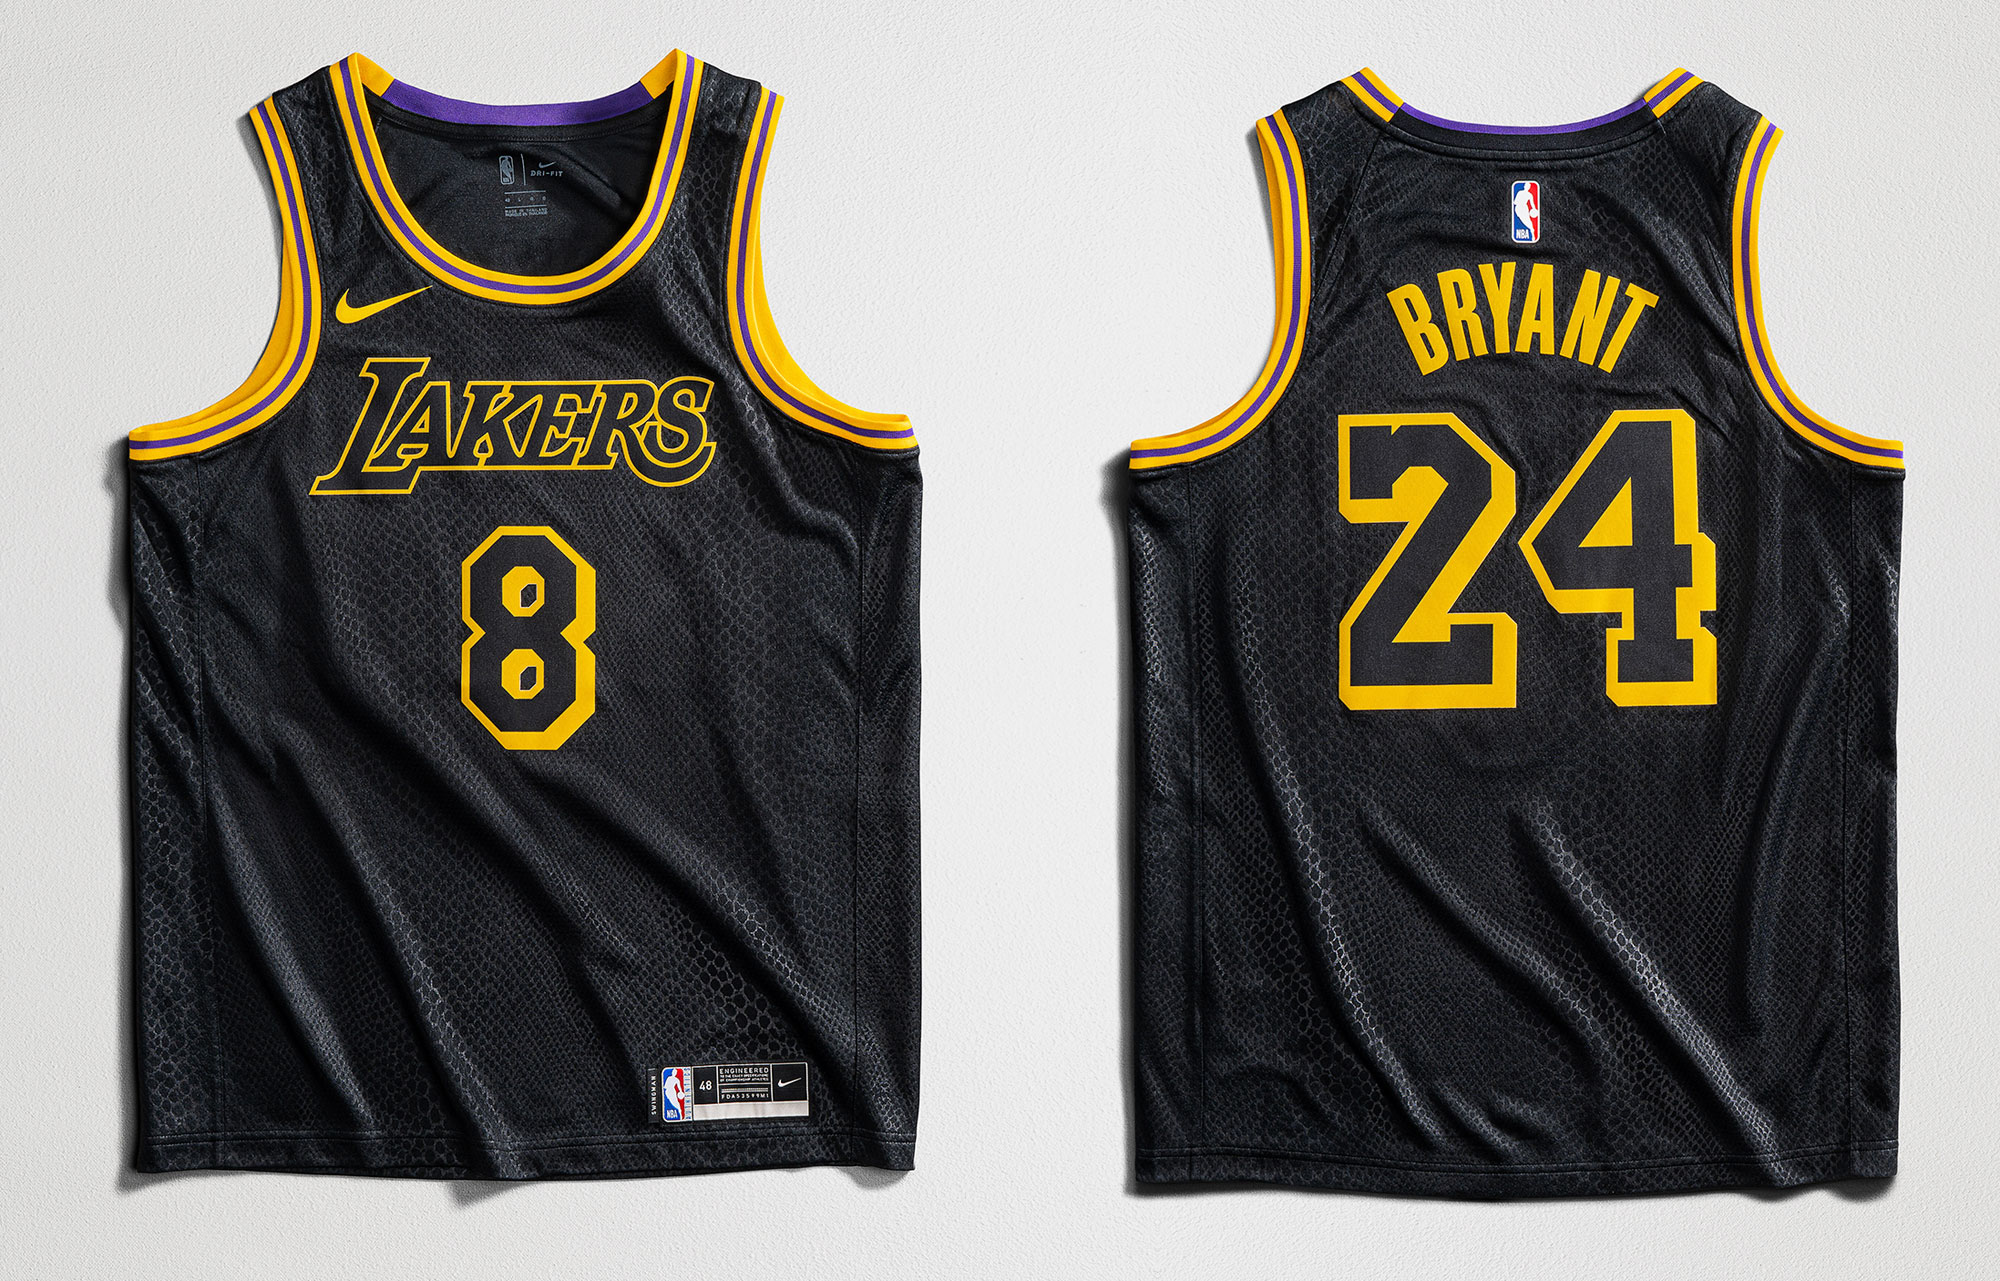 Black Kobe Shirt Discount Sale, UP TO 67% OFF